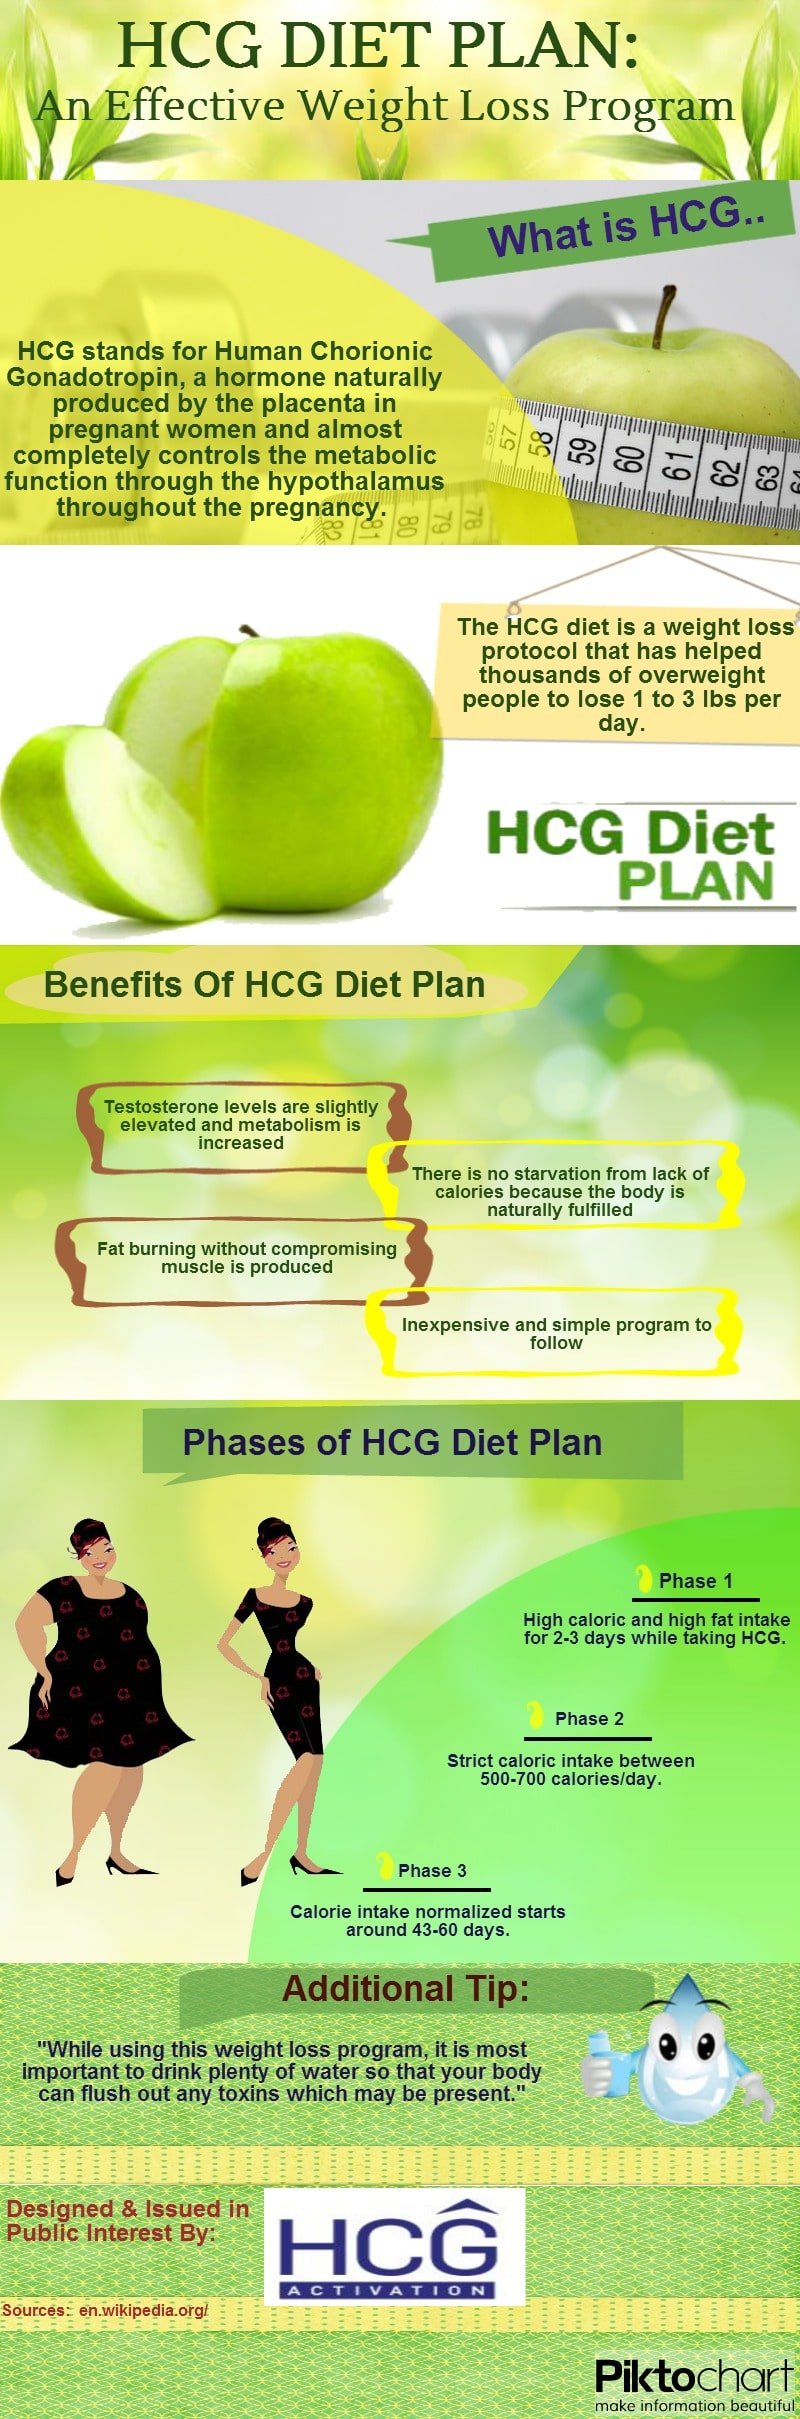 HCG Diet Plan for Weight loss